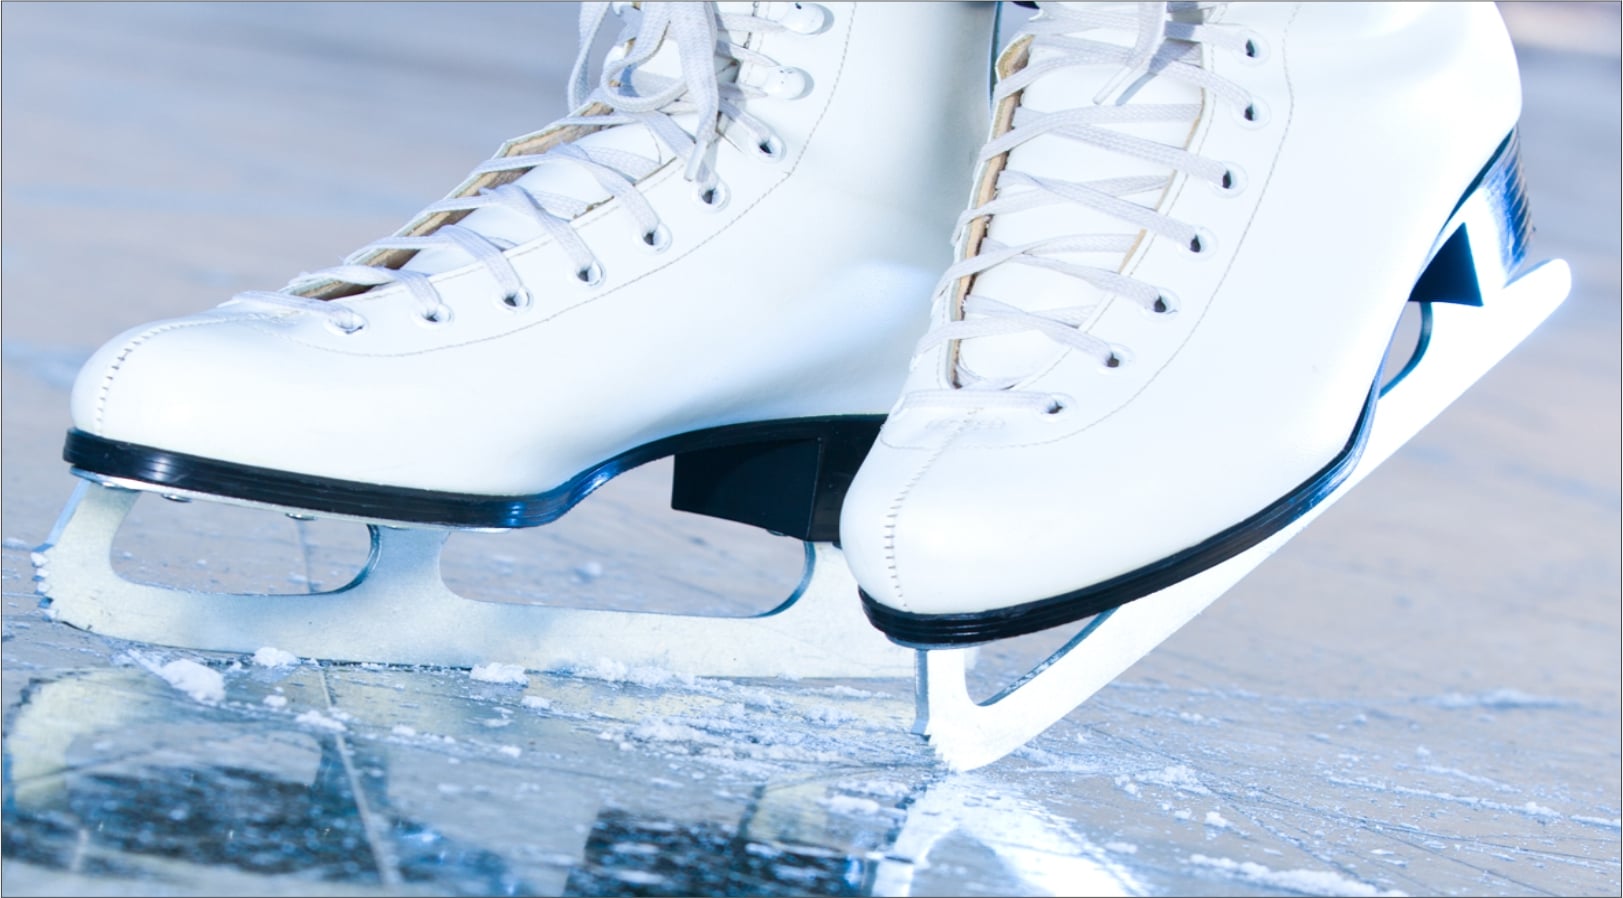 ICE SKATING WEEKEND 2019 features image